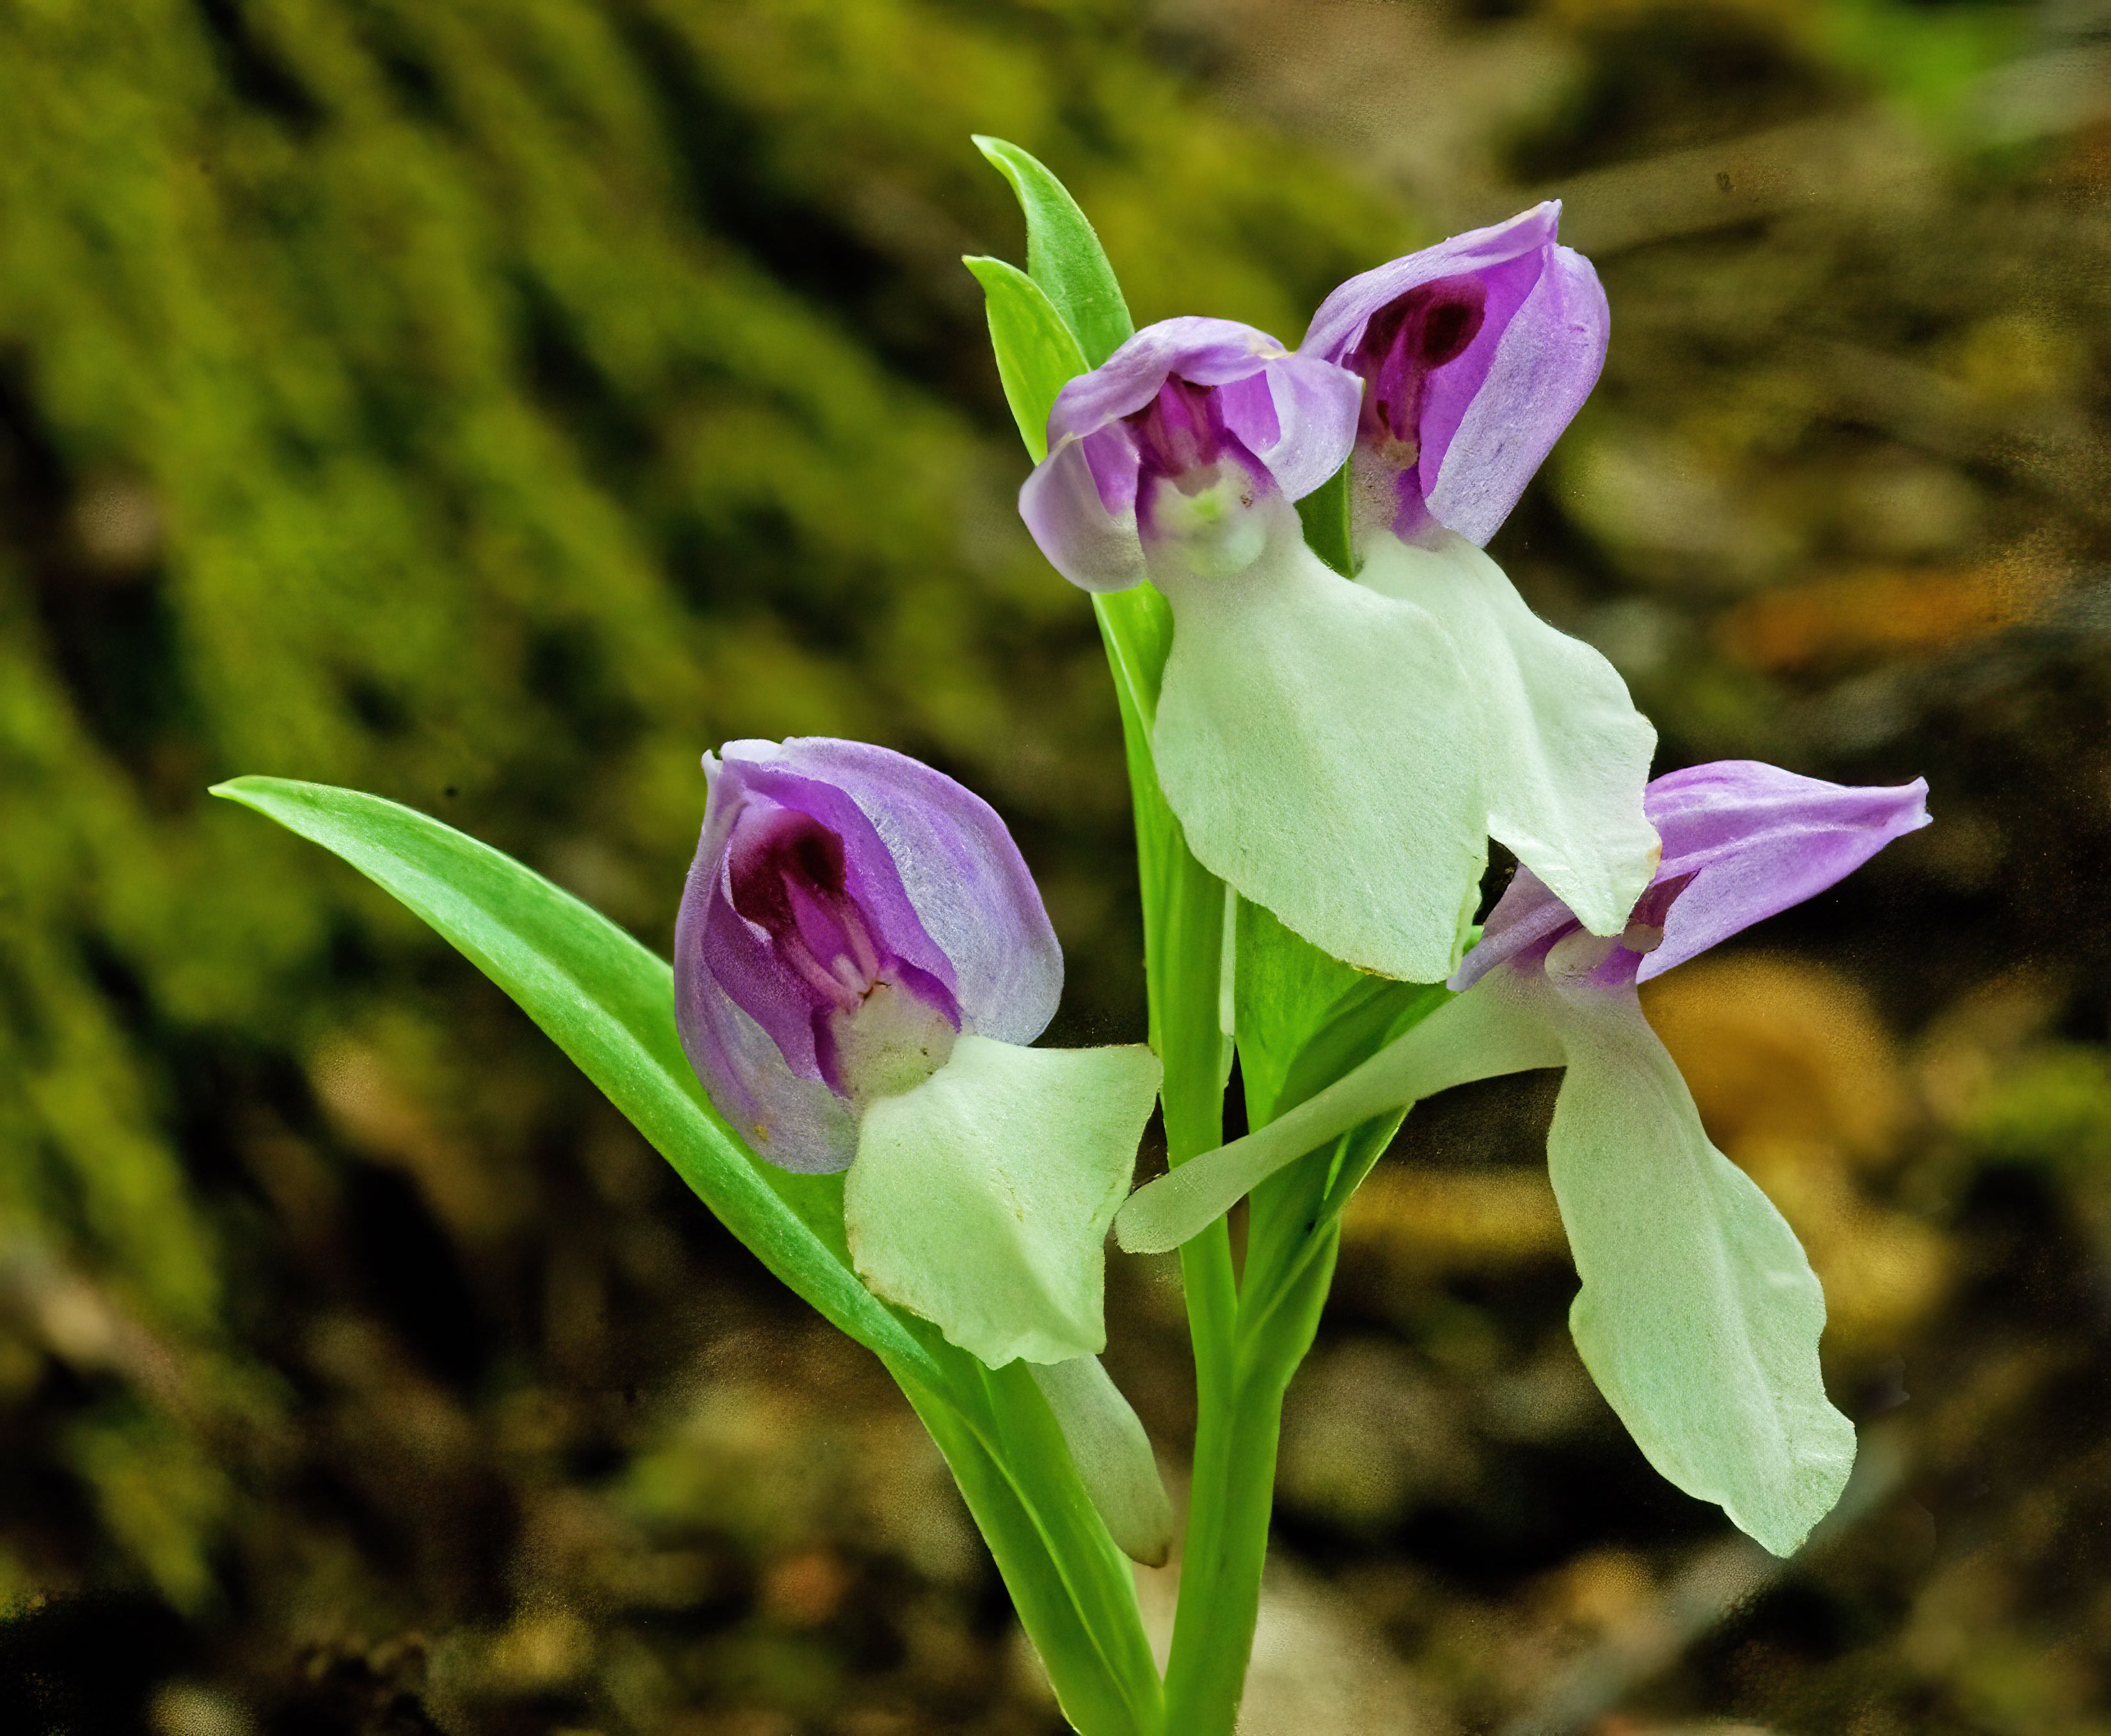 The Scientific Name is Galearis spectabilis [= Orchis spectabilis]. You will likely hear them called Showy Orchis. This picture shows the Rosy-pink sepals and petals above the large white lip. of Galearis spectabilis [= Orchis spectabilis]